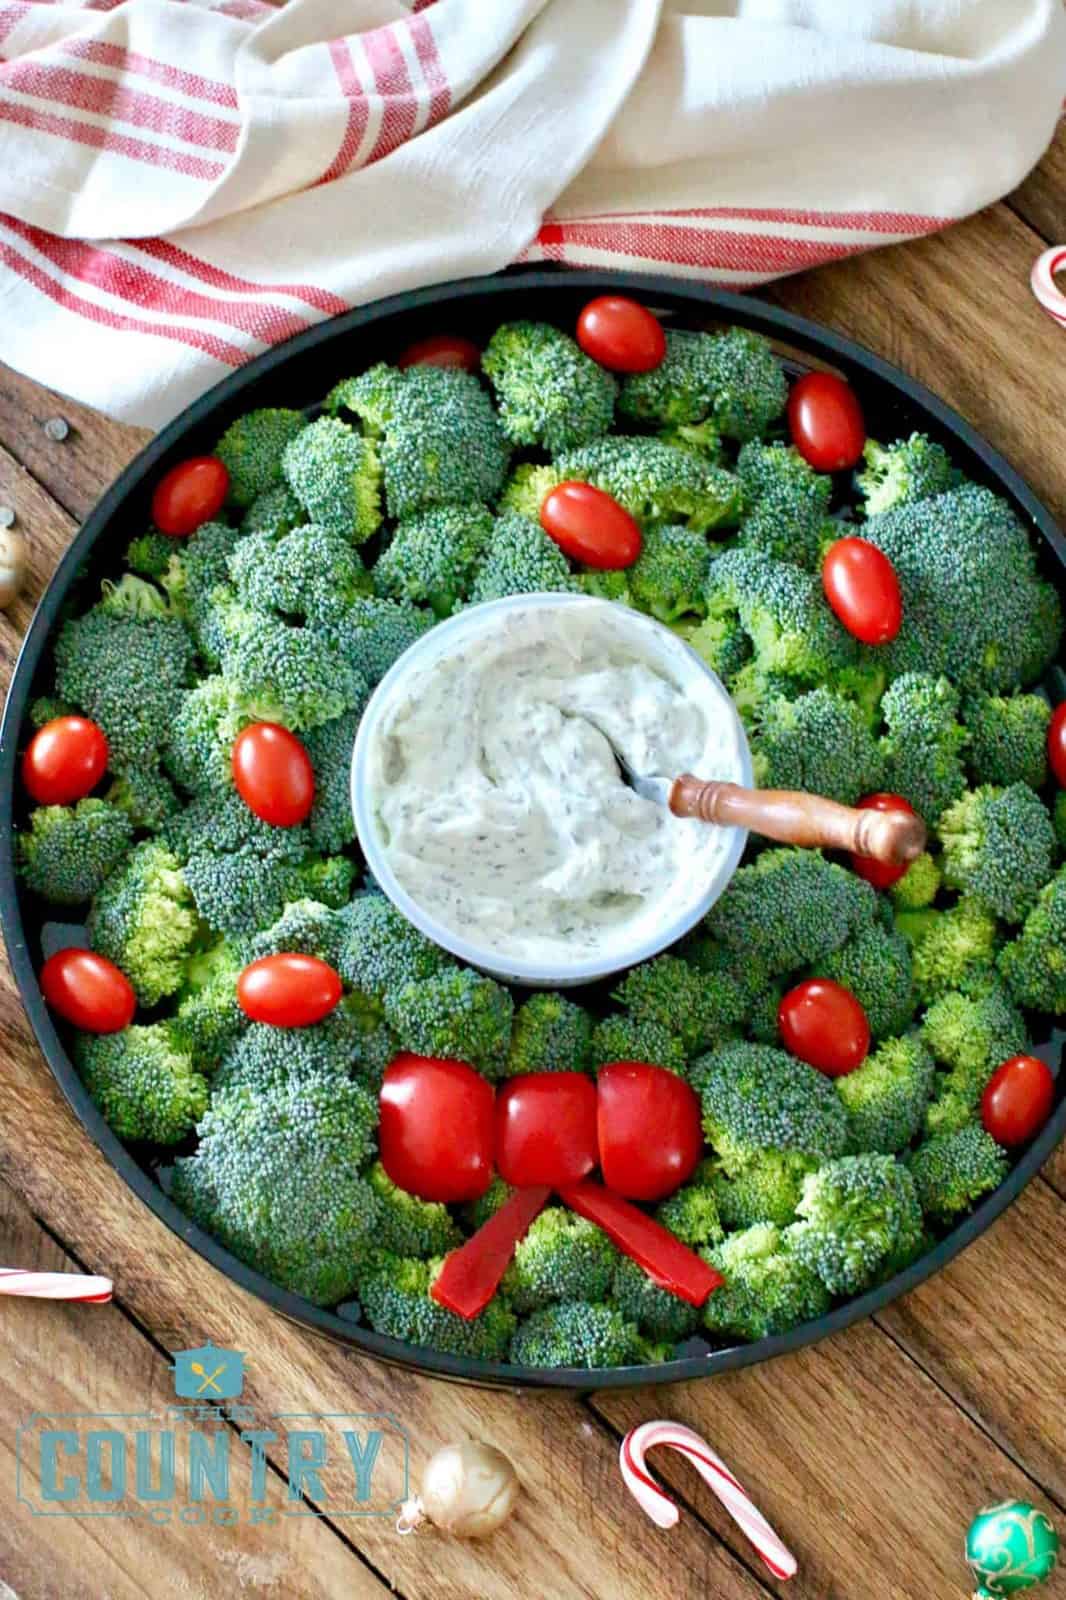 a close up photo of the vegetable Christmas wreath made in a circle using broccoli florets, grape tomatoes and red peppers.